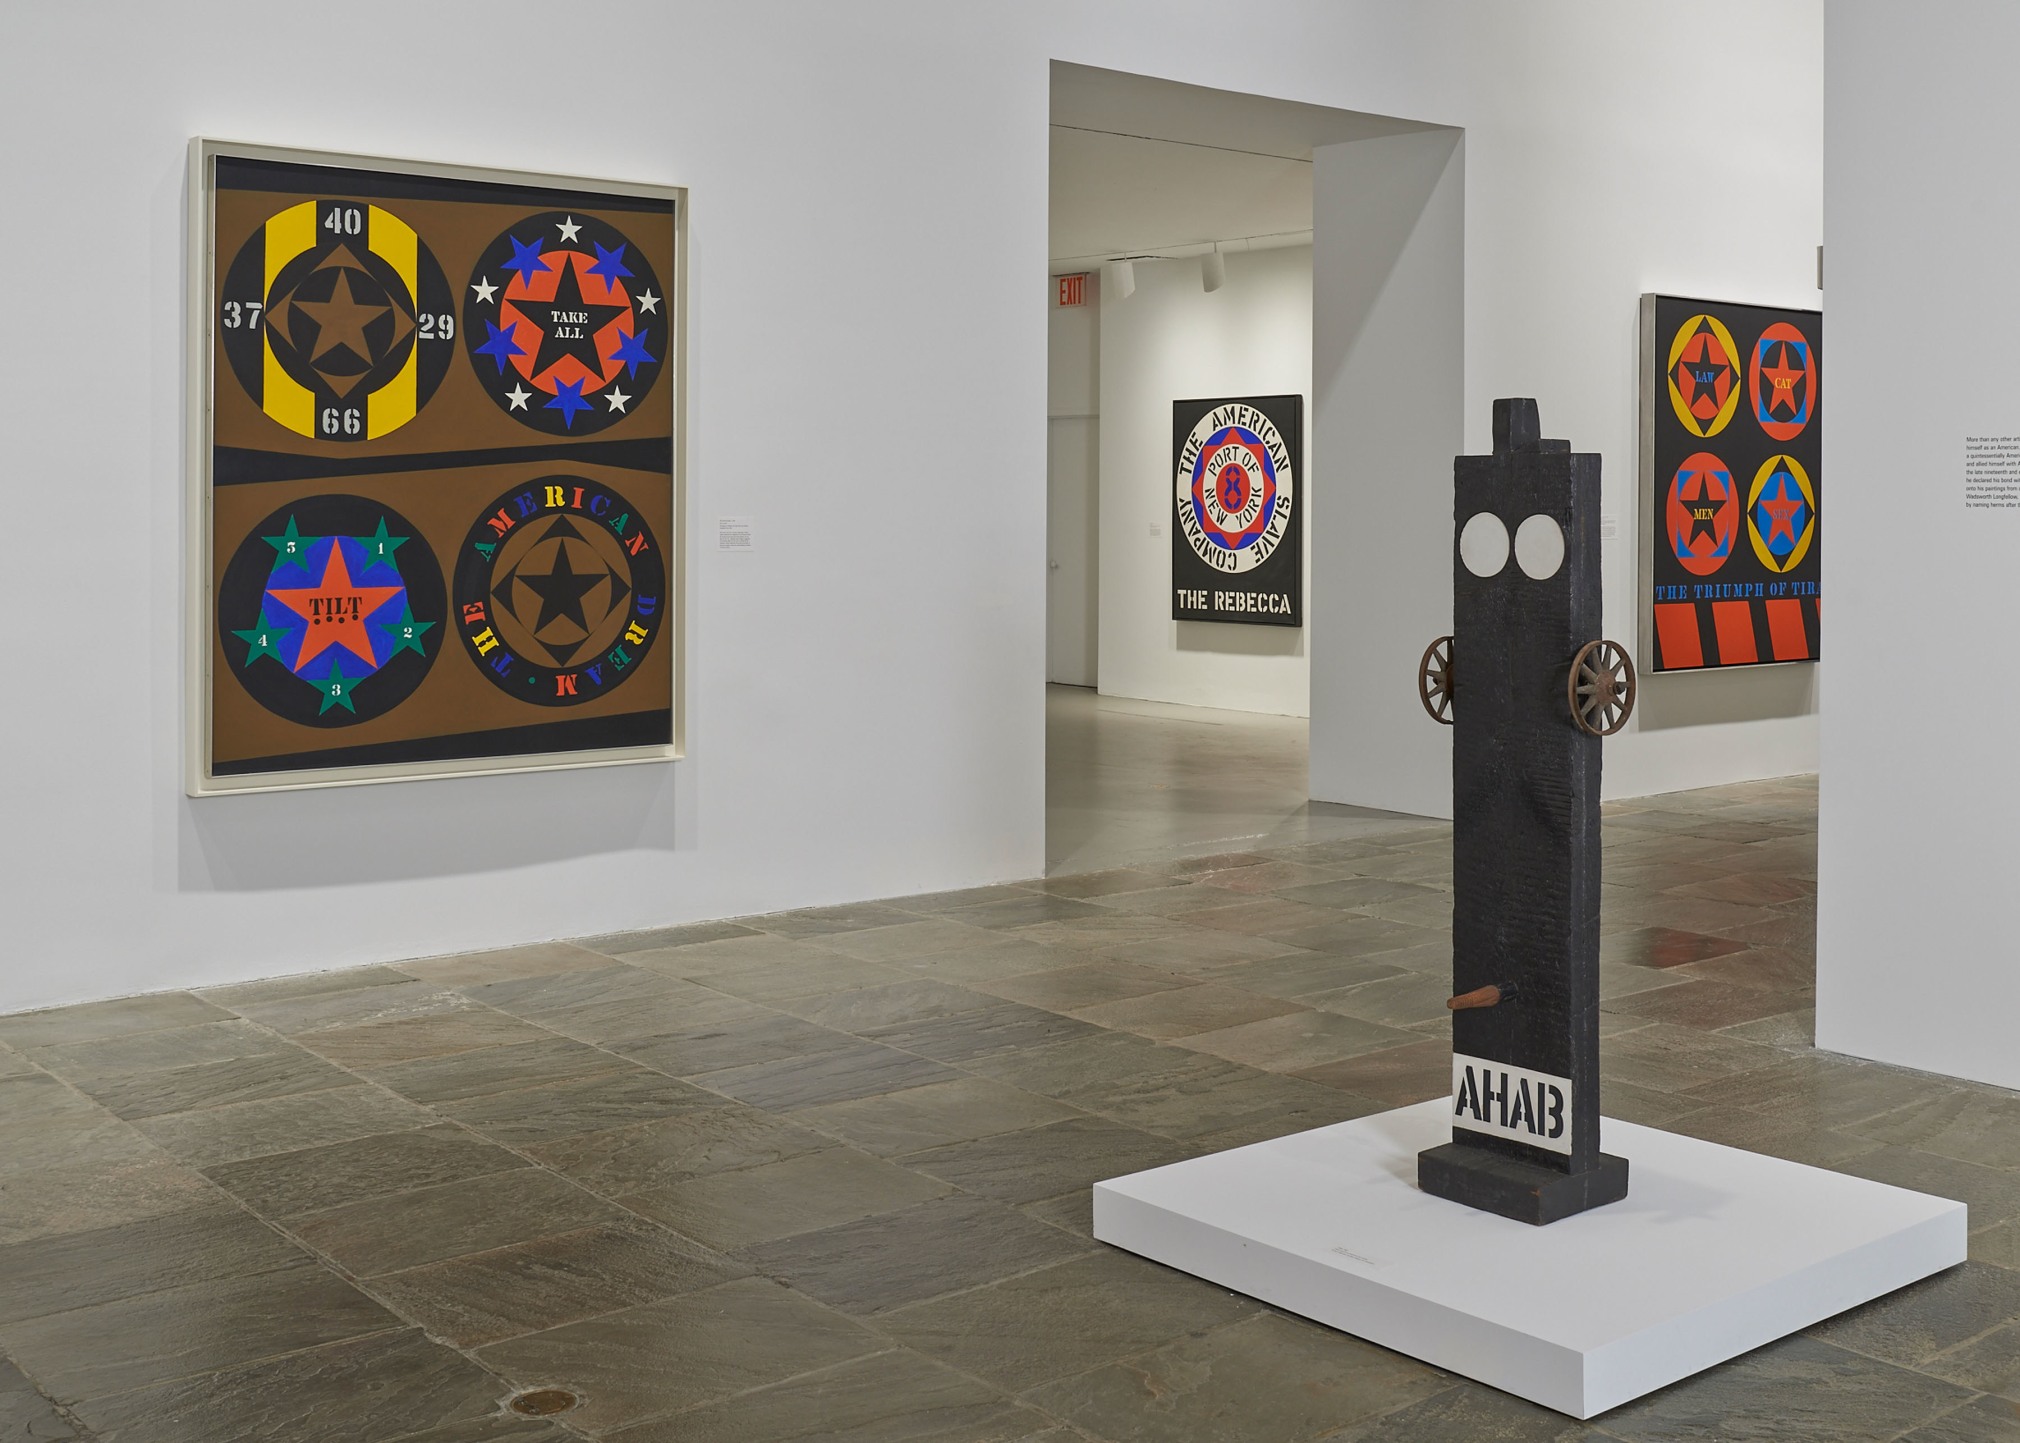 Installation view of Robert Indiana: Beyond LOVE, Whitney Museum of American Art, New York, September 26, 2013&ndash;January 5, 2014. Left to right, The American Dream, I (1960&ndash;61), The Rebecca (1962), Ahab (1960&ndash;62), and The Triumph of Tira (1960&ndash;62). Photo: Tom Powel Imaging; Artwork: &copy; Morgan Art Foundation Ltd./Artists Rights Society (ARS), NY